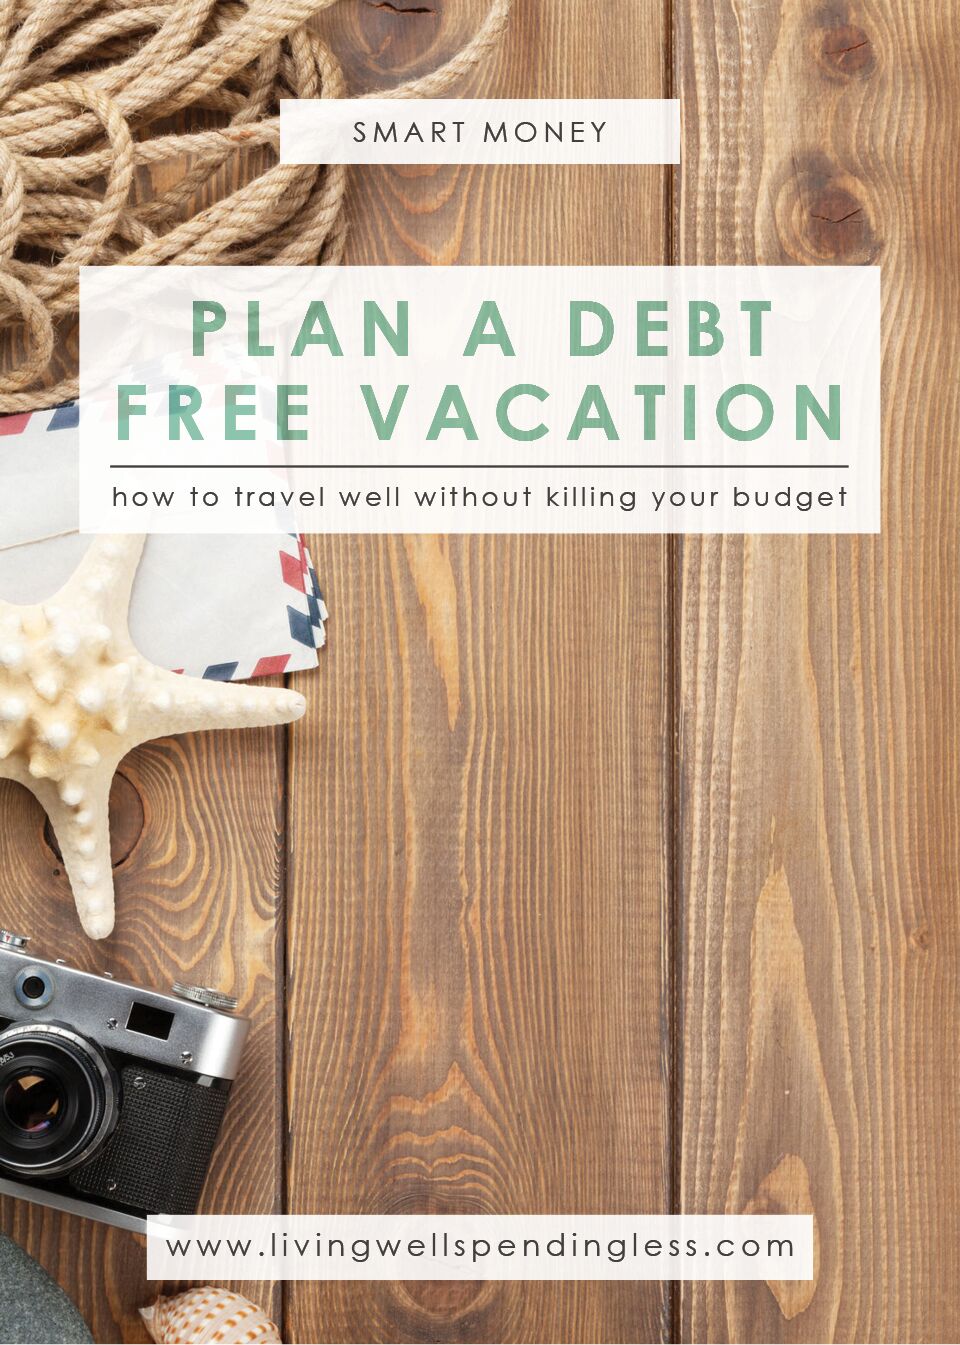 Plan a Debt Free Vacation | Money Saving Tips | Travel Wisely | Save on your Vacation